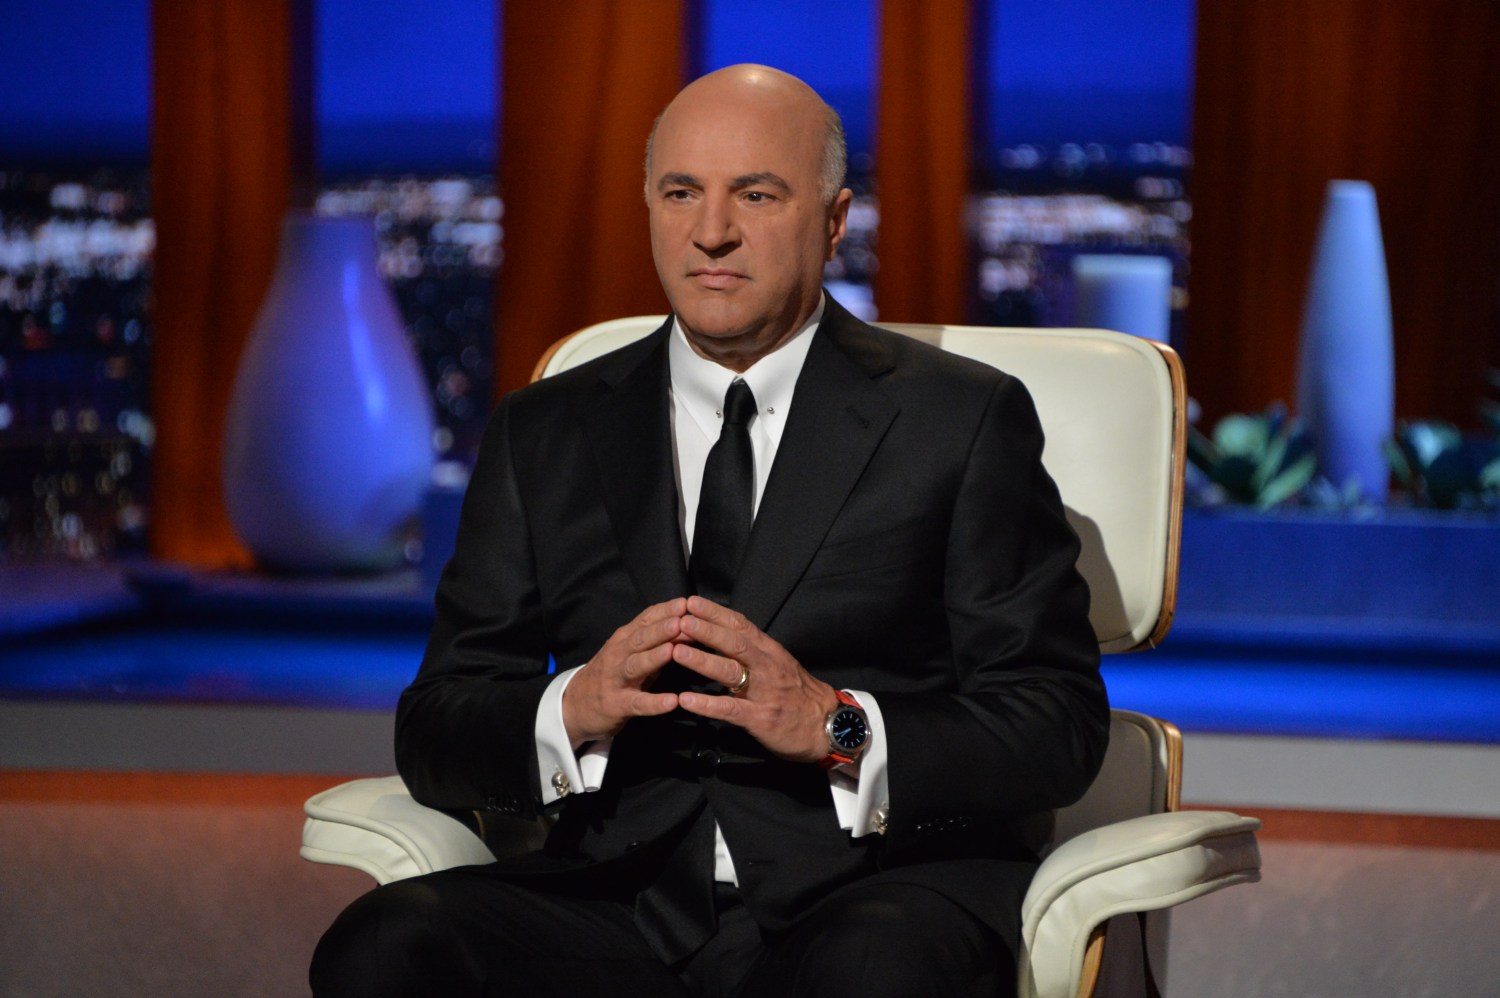 Kevin O'Leary aka Mr. Wonderful on X: It's not every day a shark gets lured  back in after going out, but Animated Lure was too good - I had to bite!  #sharktank